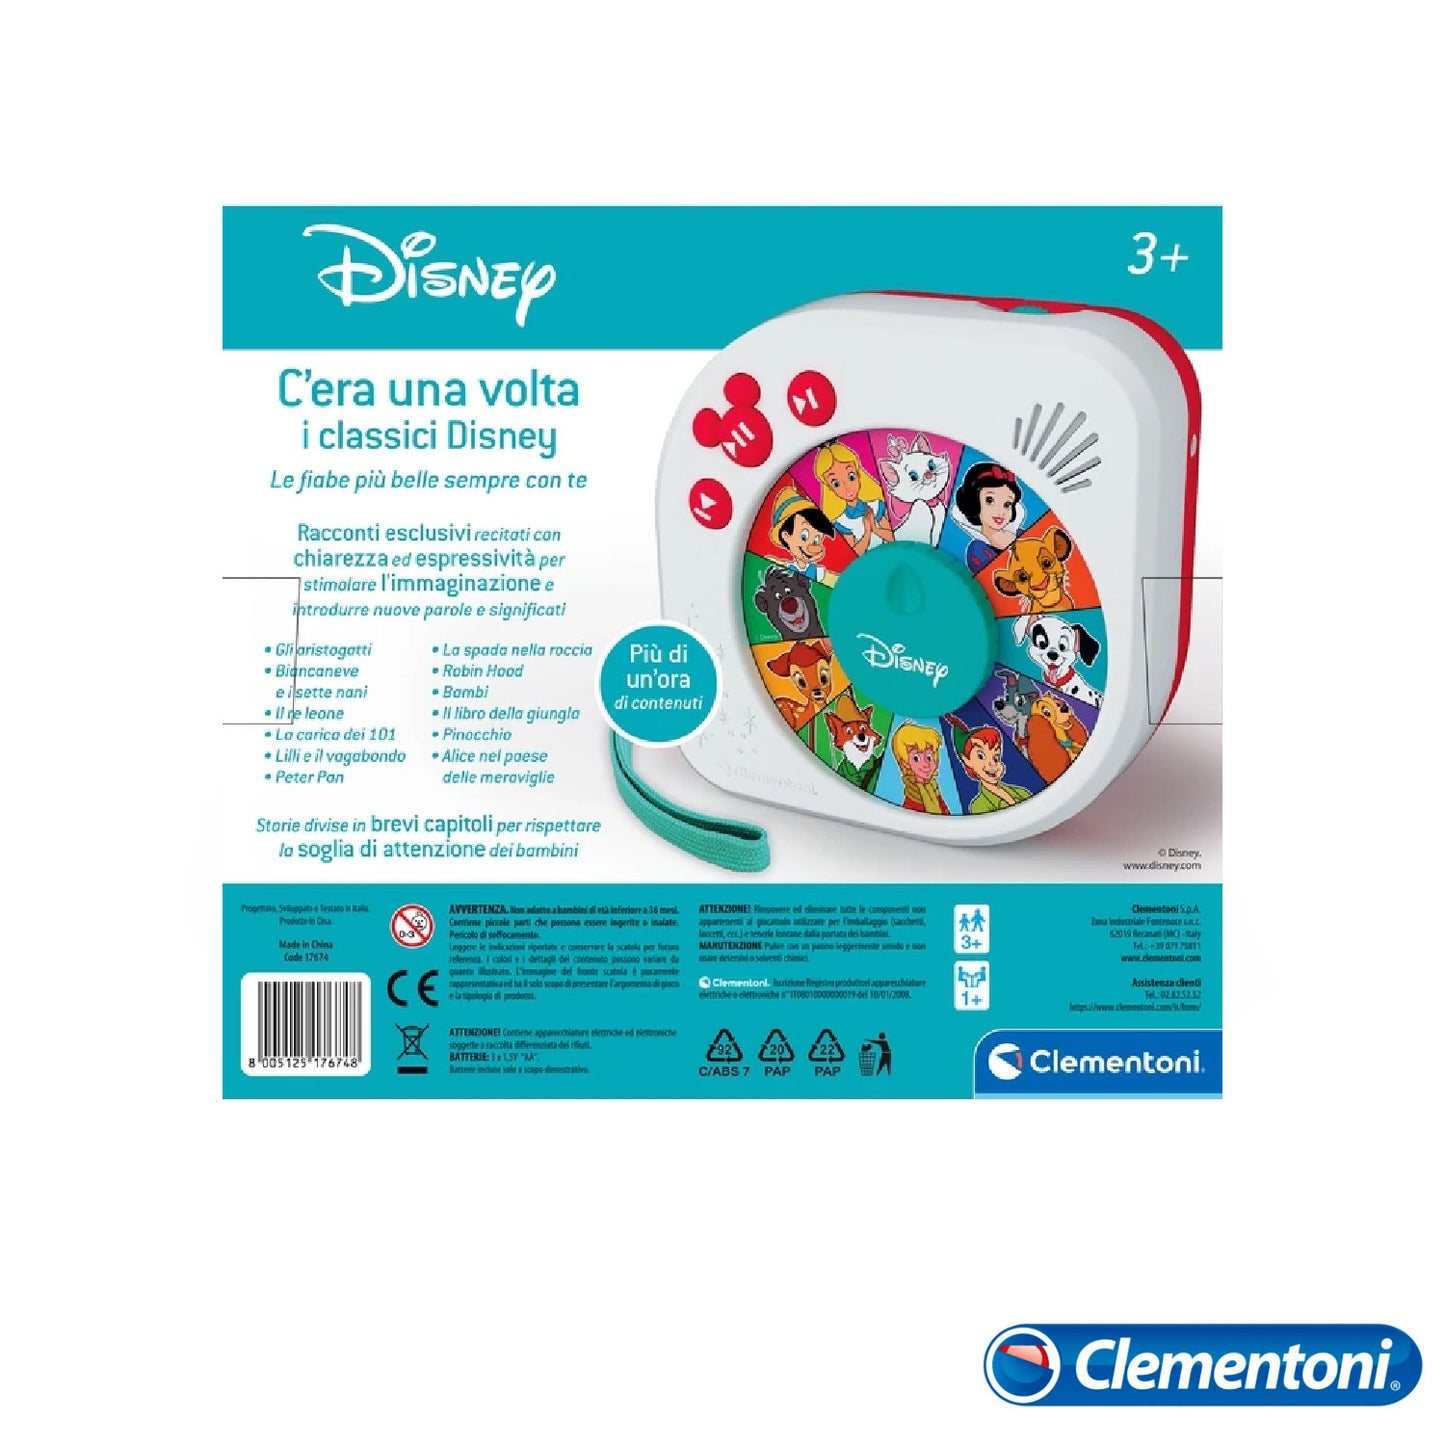 Clementoni - Once Upon a Time Disney Classics 17674